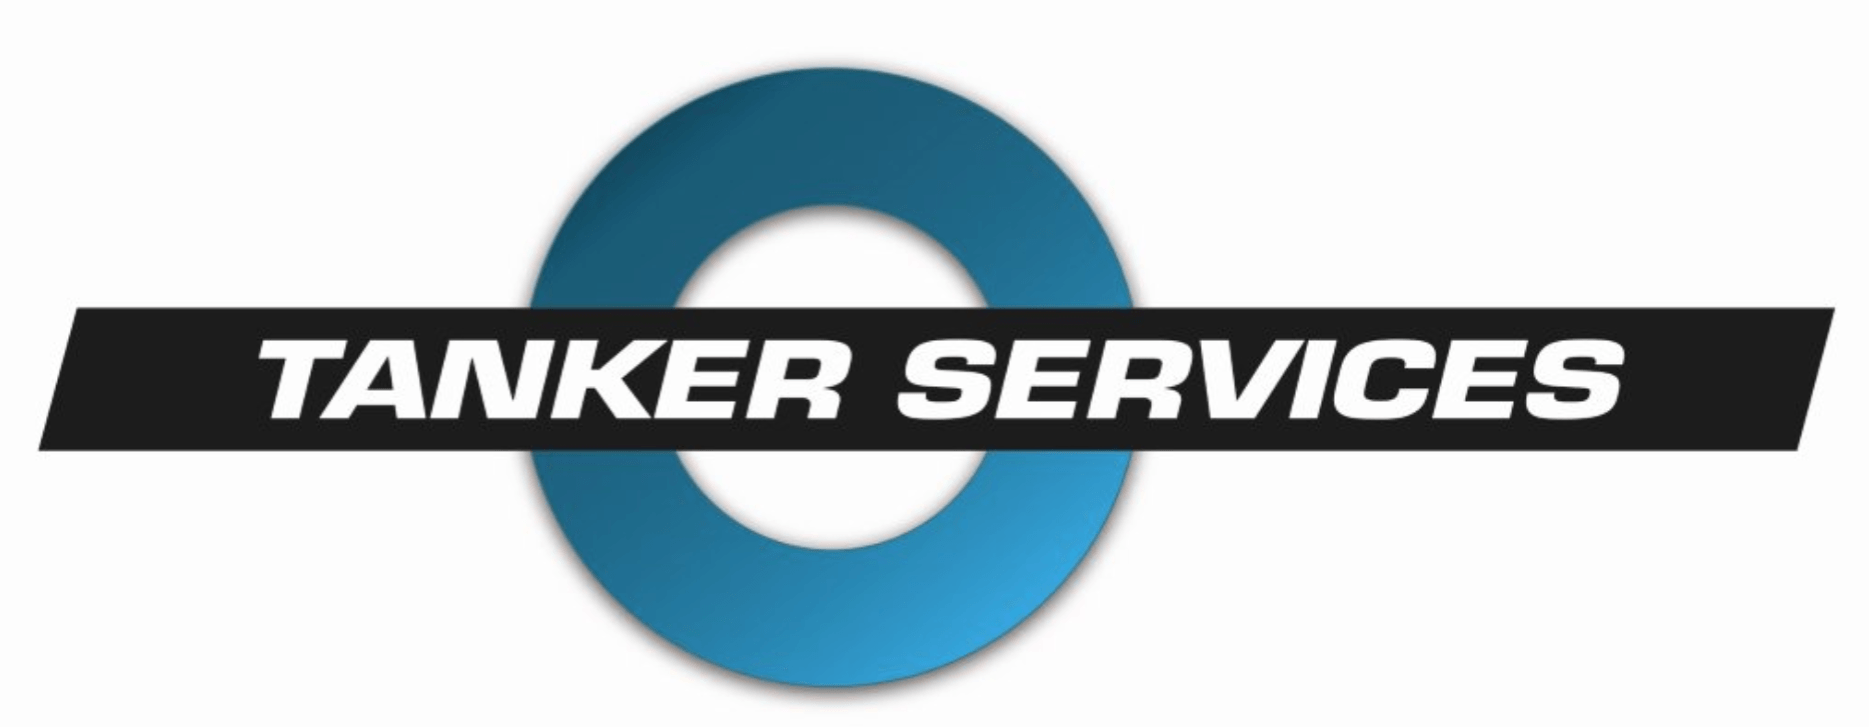 Chemical Service Logo - Supply Chain Network - Tanker Services Food and Chemicals, a ...